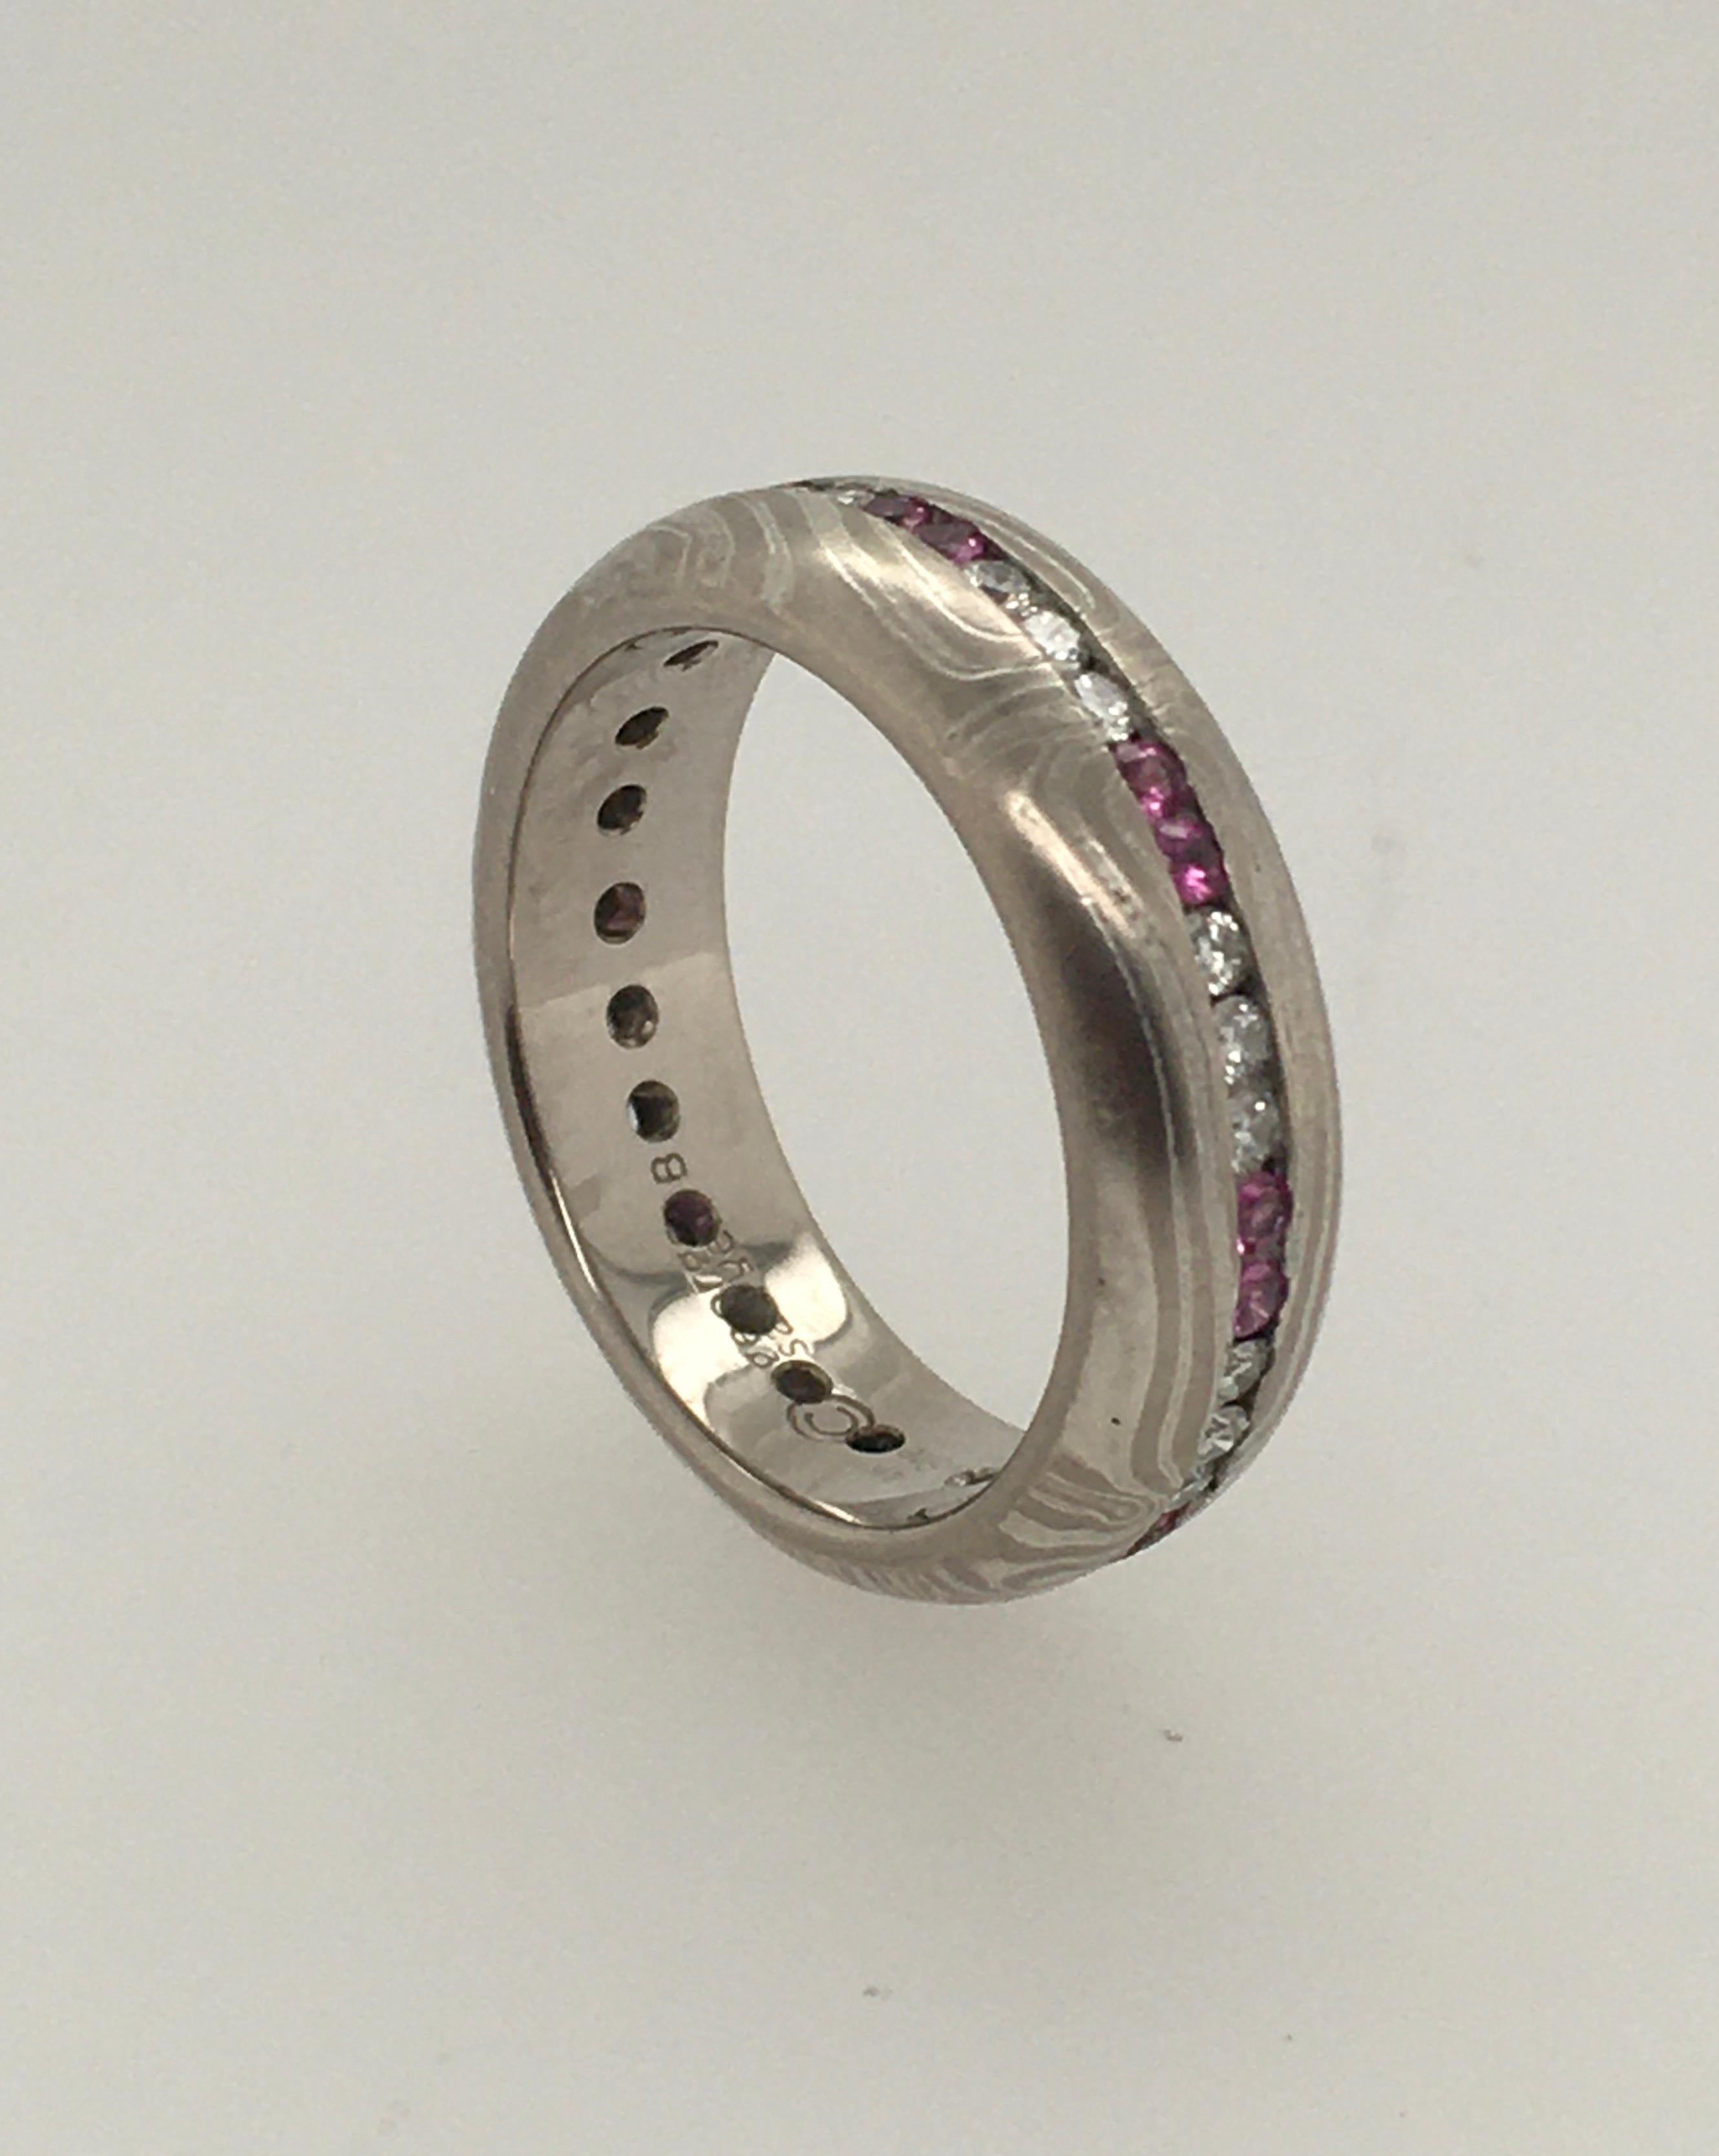 A striking George Sawyer symmetry* wedding band in the traditional Mokume style. This band features 1.5 mm pink sapphires .35 ct & .36 ct diamonds, in a repeating pattern of 3 diamonds/2 sapphires, with 14 K White Gold and Sterling Silver. The Style